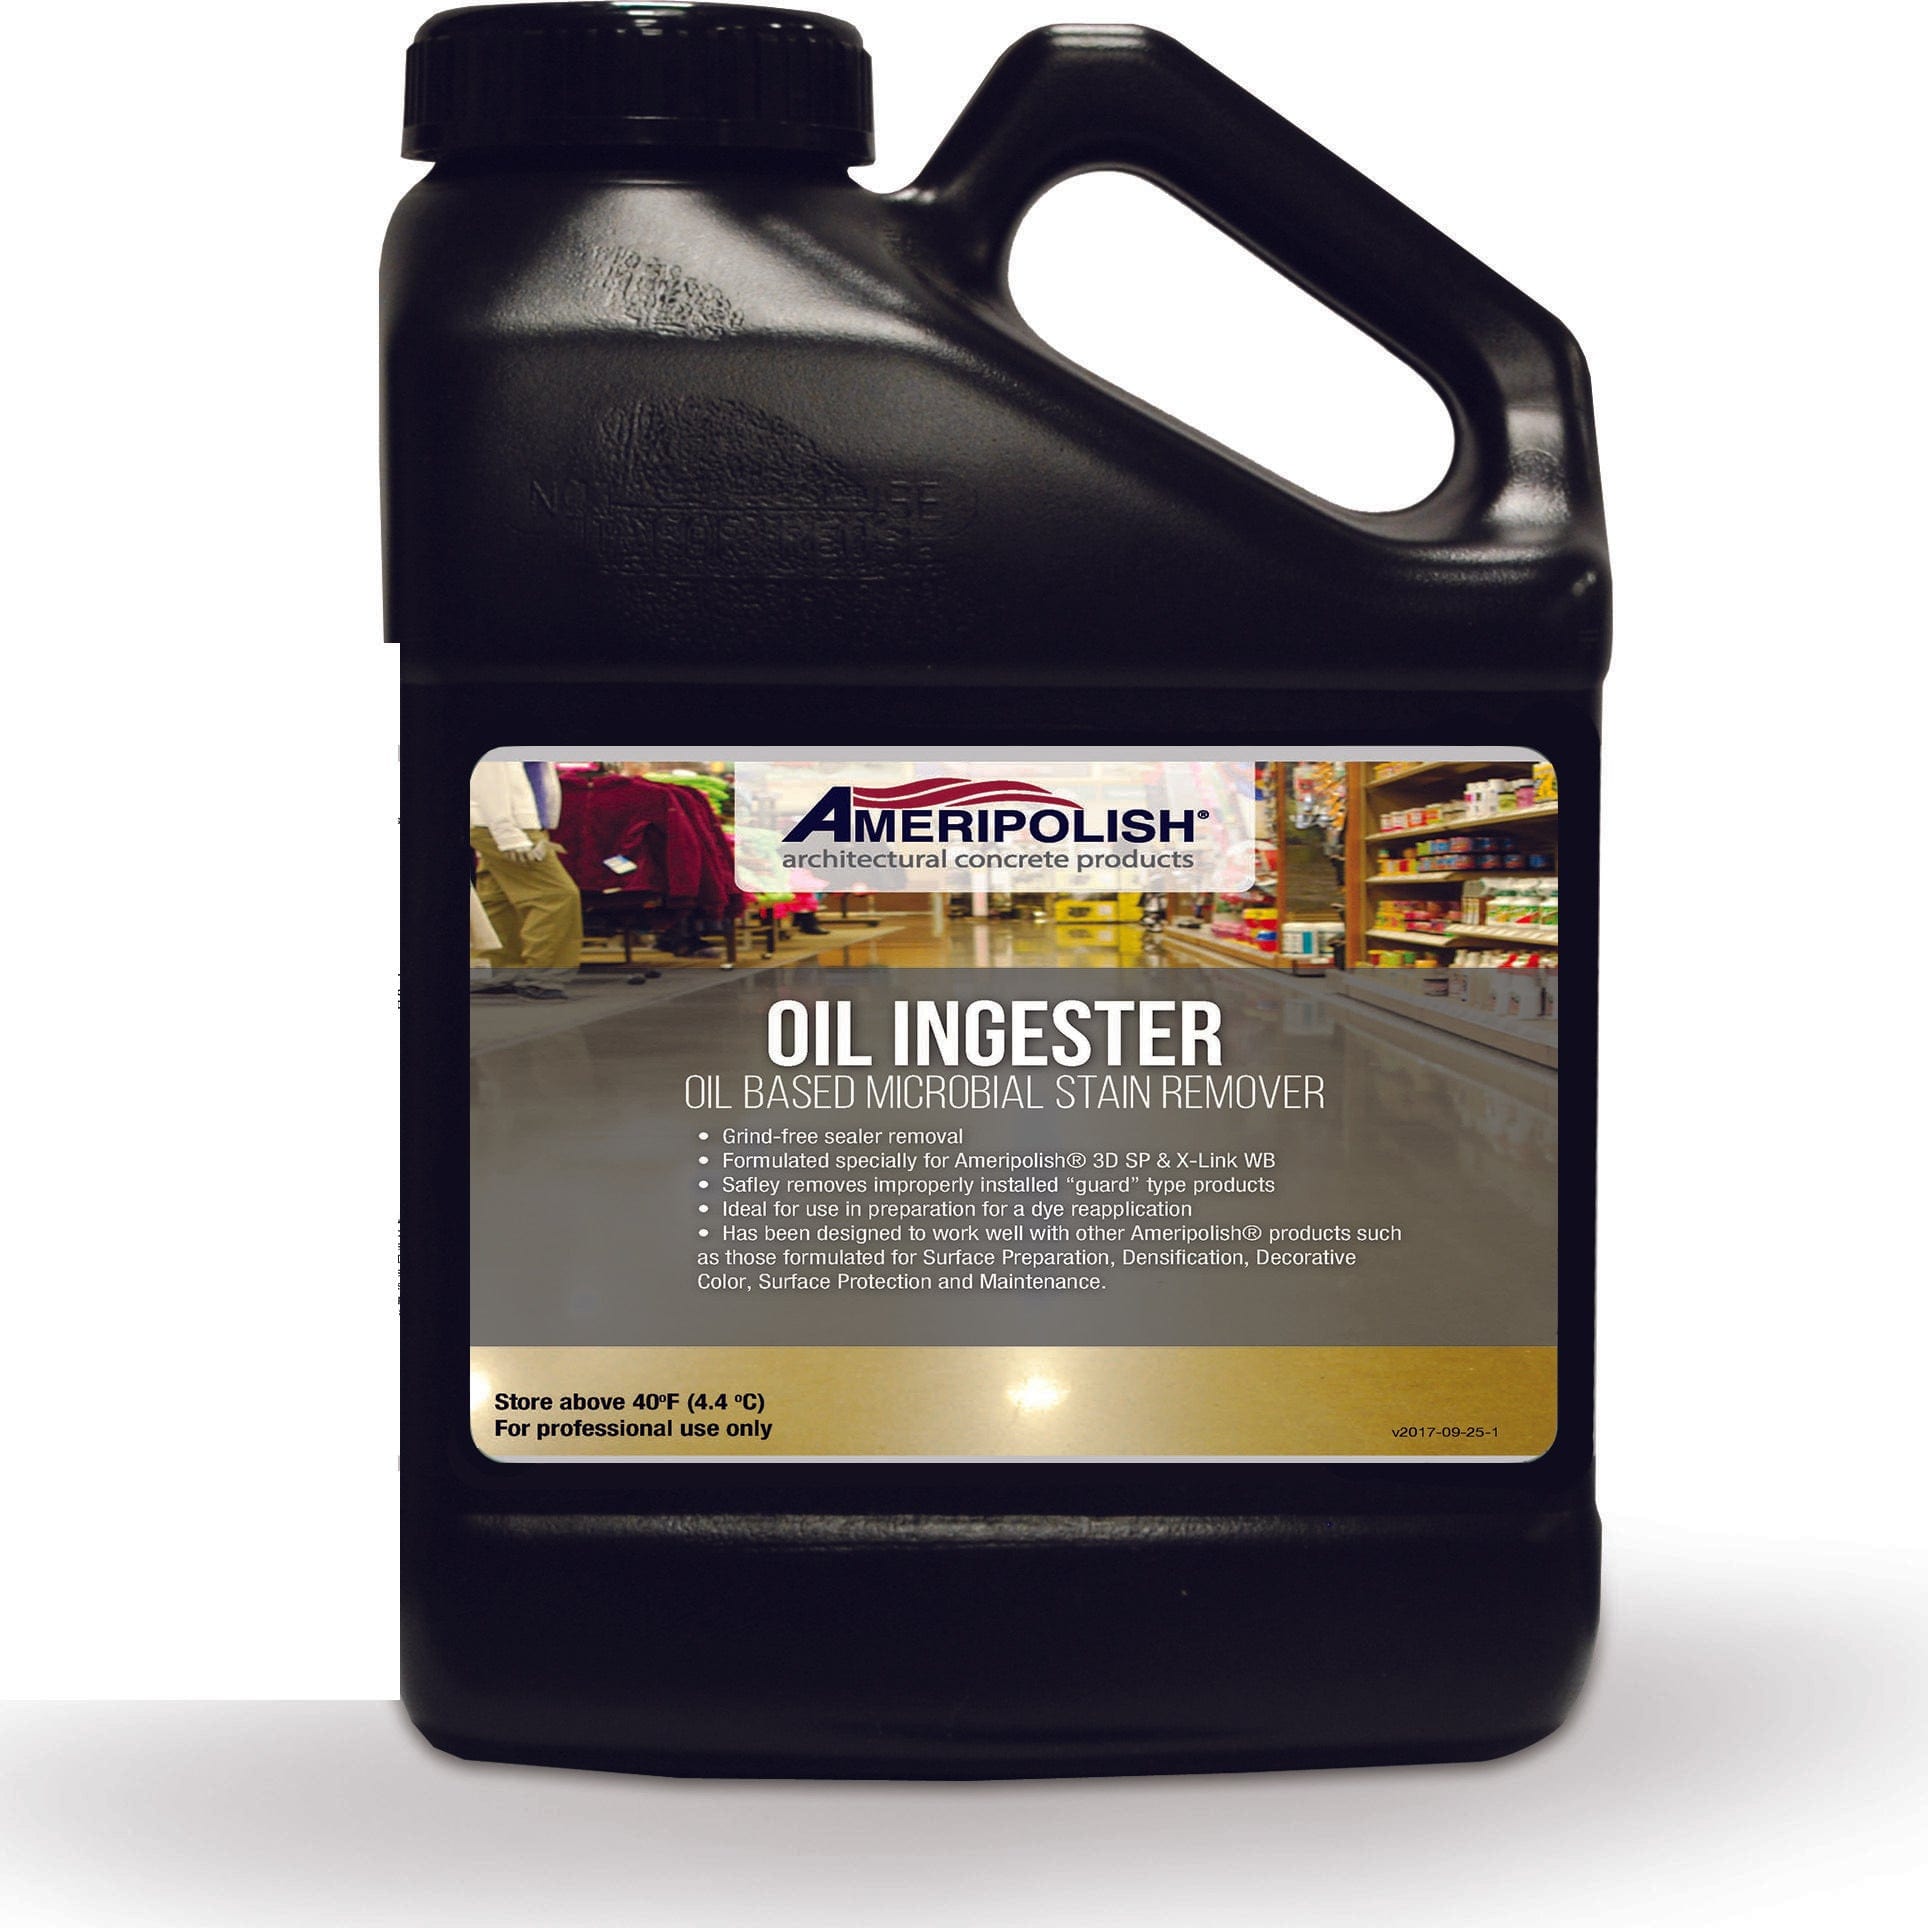 Oil Ingester Concrete Stain Remover - Xtreme Polishing Systems: concrete degreaser, cleaners degreasers, best concrete cleaners, and oil remover concrete. 